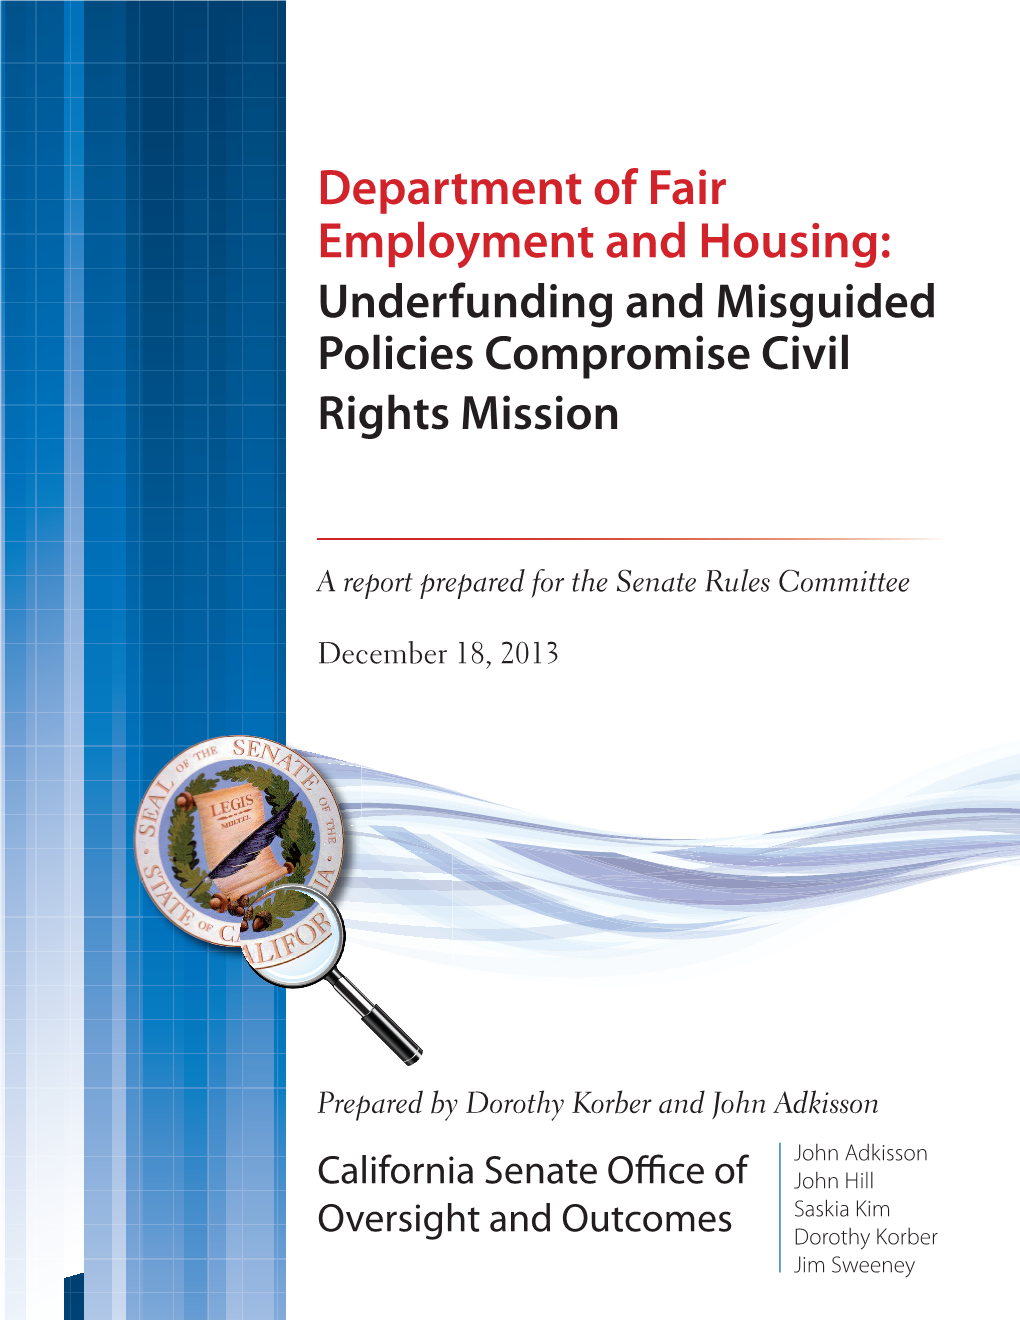 Department of Fair Employment and Housing: Underfunding and Misguided Policies Compromise Civil Rights Mission